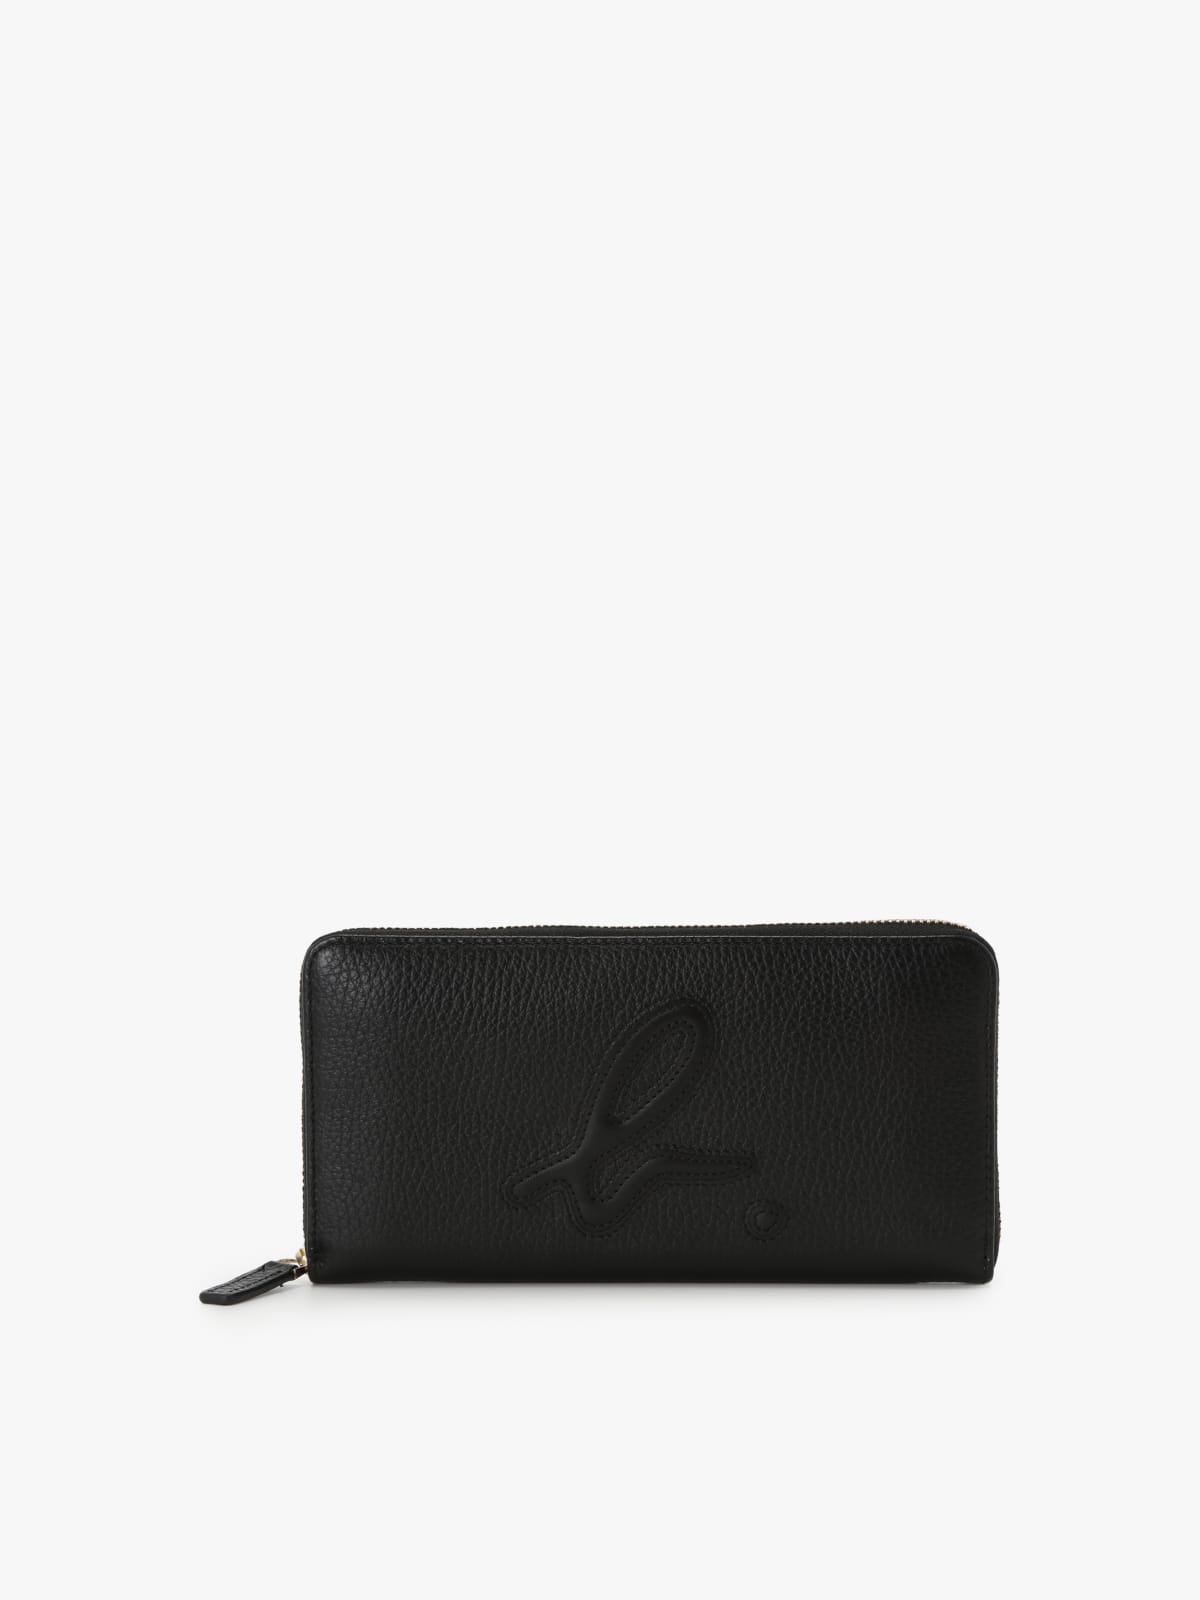 smooth leather "b." logo wallet